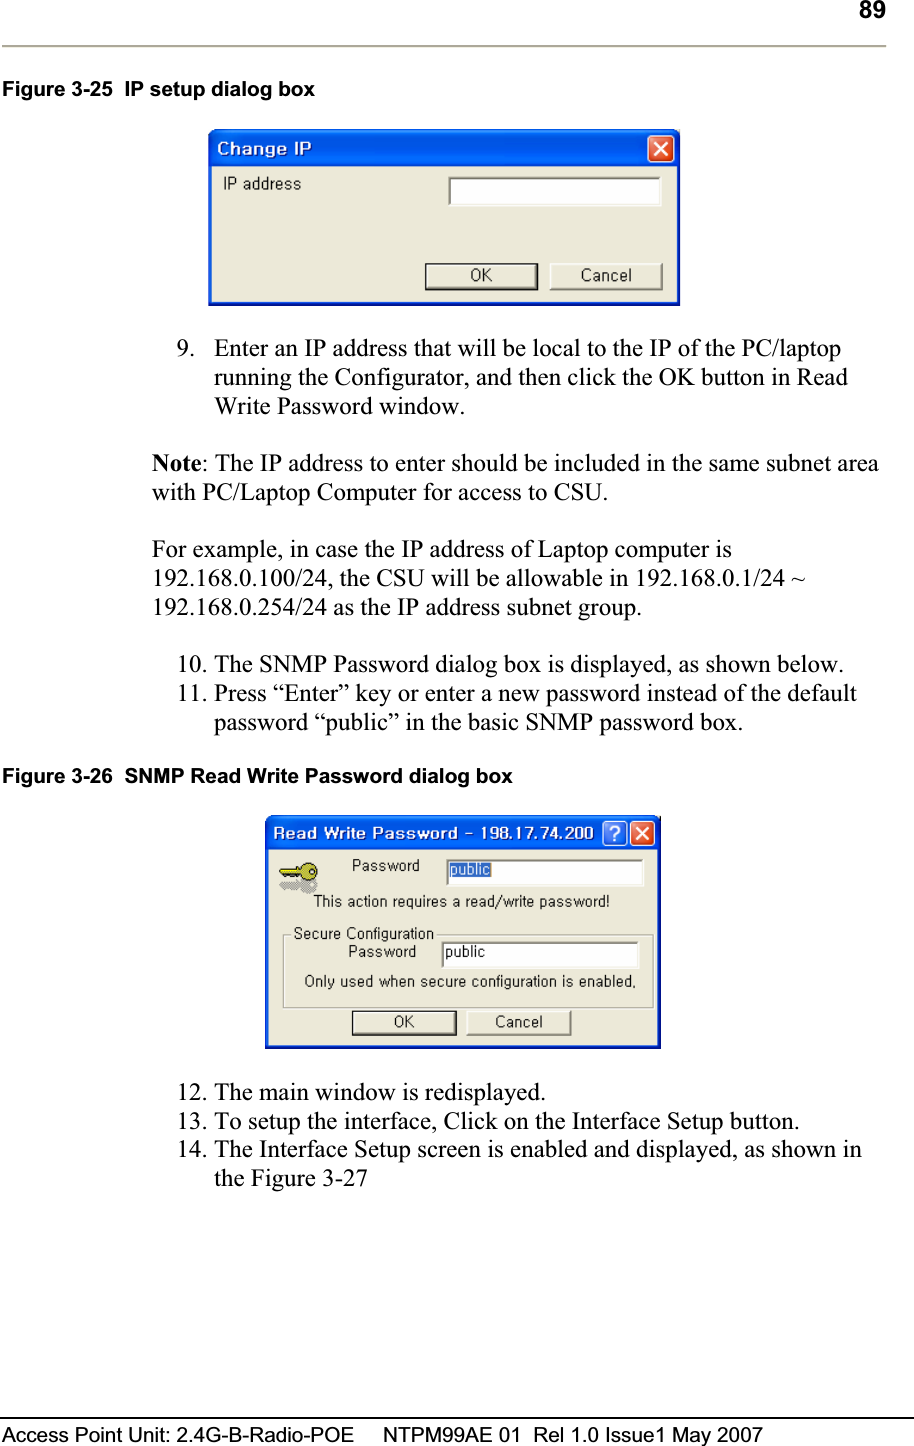 89Access Point Unit: 2.4G-B-Radio-POE     NTPM99AE 01  Rel 1.0 Issue1 May 2007 Figure 3-25  IP setup dialog box 9. Enter an IP address that will be local to the IP of the PC/laptop running the Configurator, and then click the OK button in Read Write Password window.   Note: The IP address to enter should be included in the same subnet area with PC/Laptop Computer for access to CSU.  For example, in case the IP address of Laptop computer is 192.168.0.100/24, the CSU will be allowable in 192.168.0.1/24 ~ 192.168.0.254/24 as the IP address subnet group. 10. The SNMP Password dialog box is displayed, as shown below. 11. Press “Enter” key or enter a new password instead of the default password “public” in the basic SNMP password box.Figure 3-26  SNMP Read Write Password dialog box 12. The main window is redisplayed.  13. To setup the interface, Click on the Interface Setup button.14. The Interface Setup screen is enabled and displayed, as shown in the Figure 3-27 